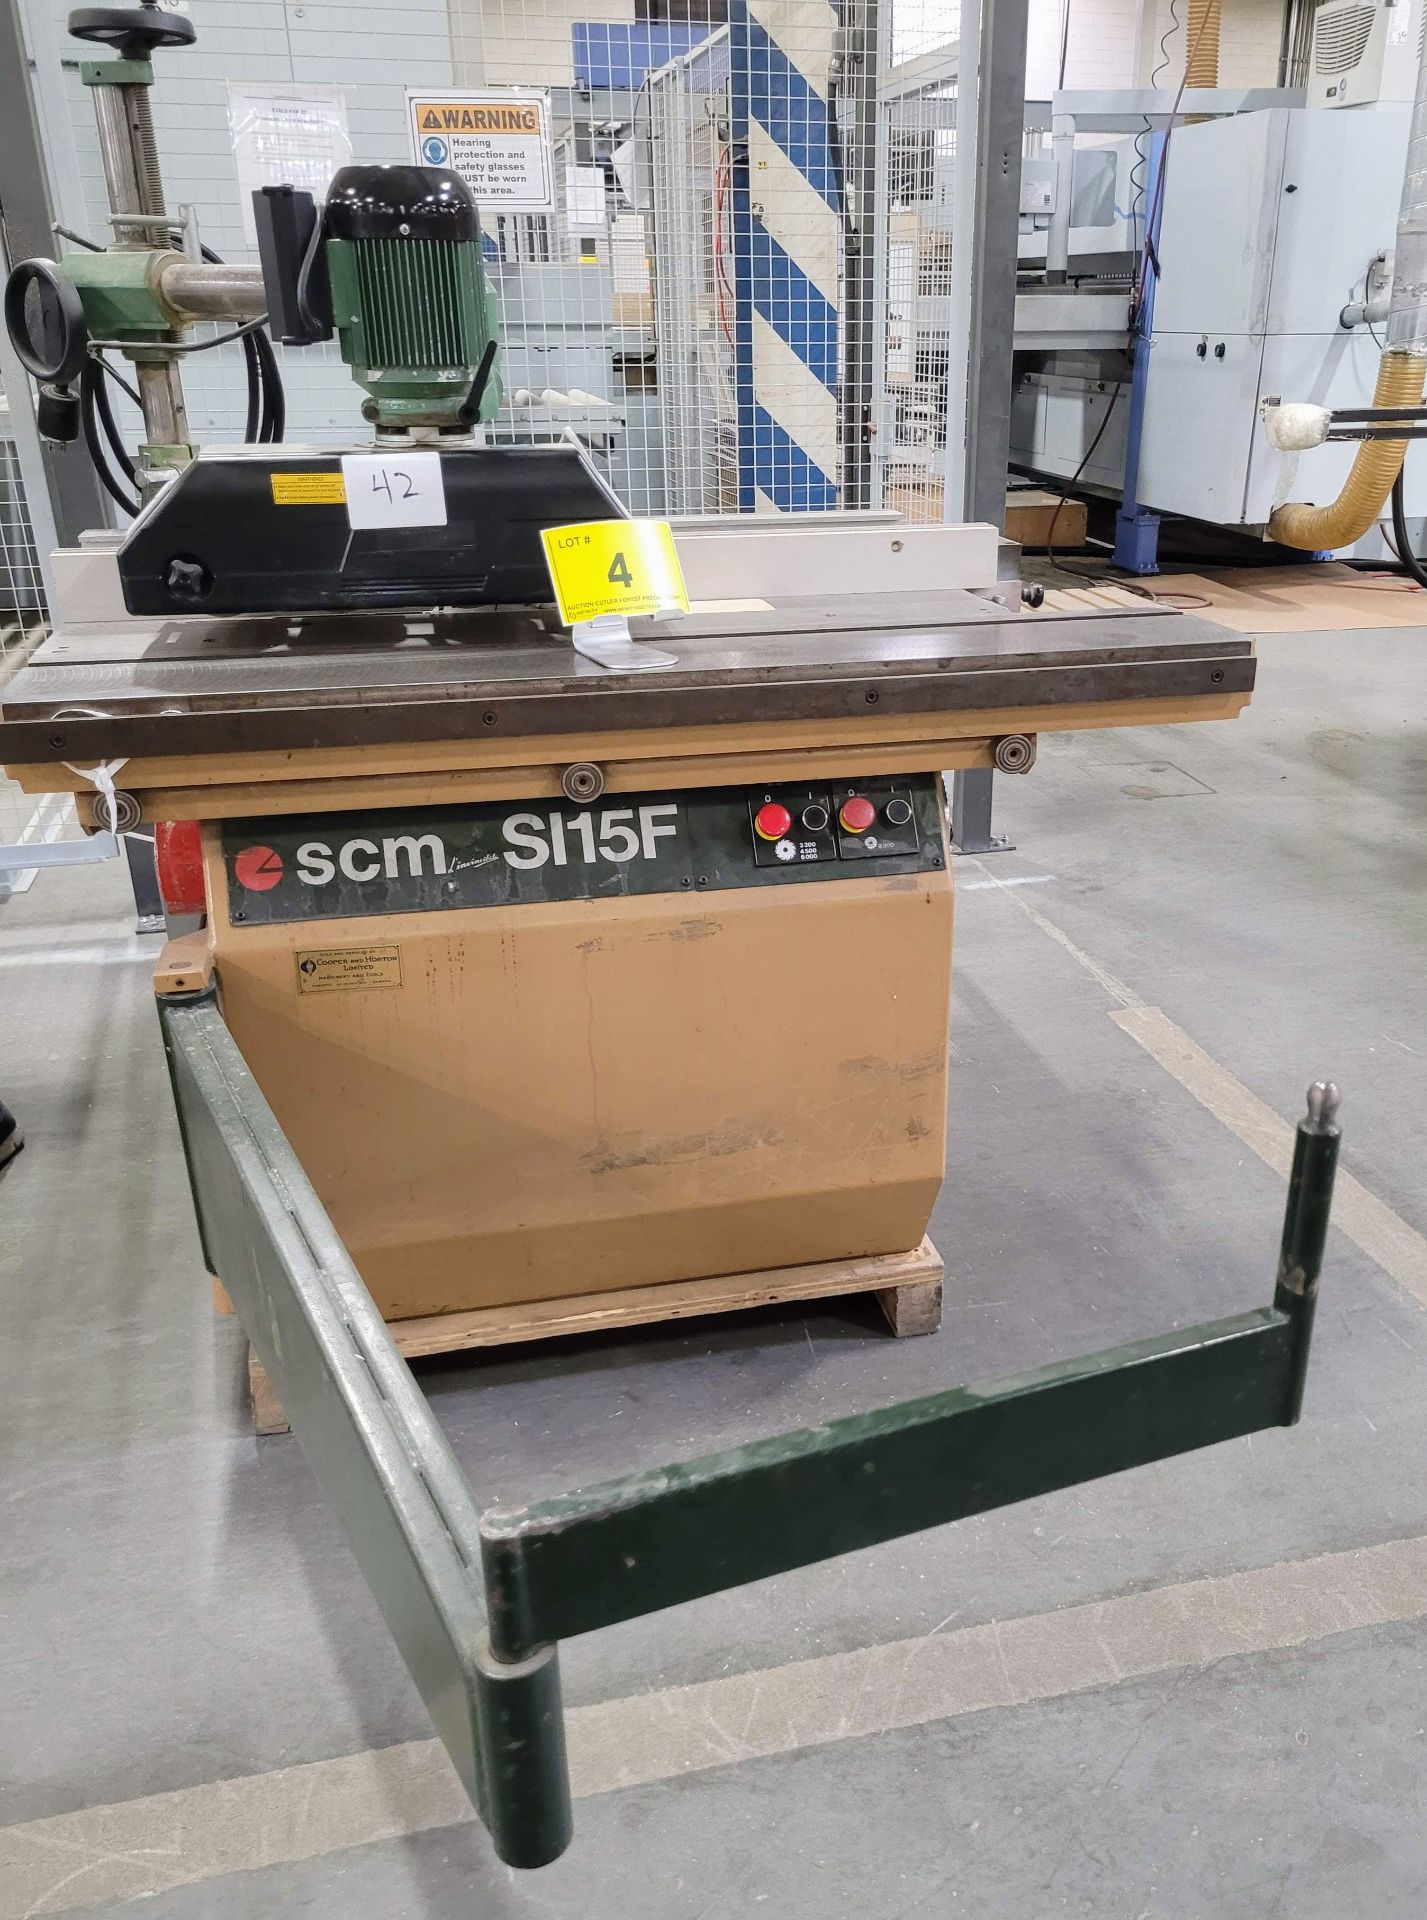 SCM SL15F SLIDING TABLE SAW, S/N AB 10726 W/ 4-ROLL MATERIAL POWER FEEDER - Image 2 of 5